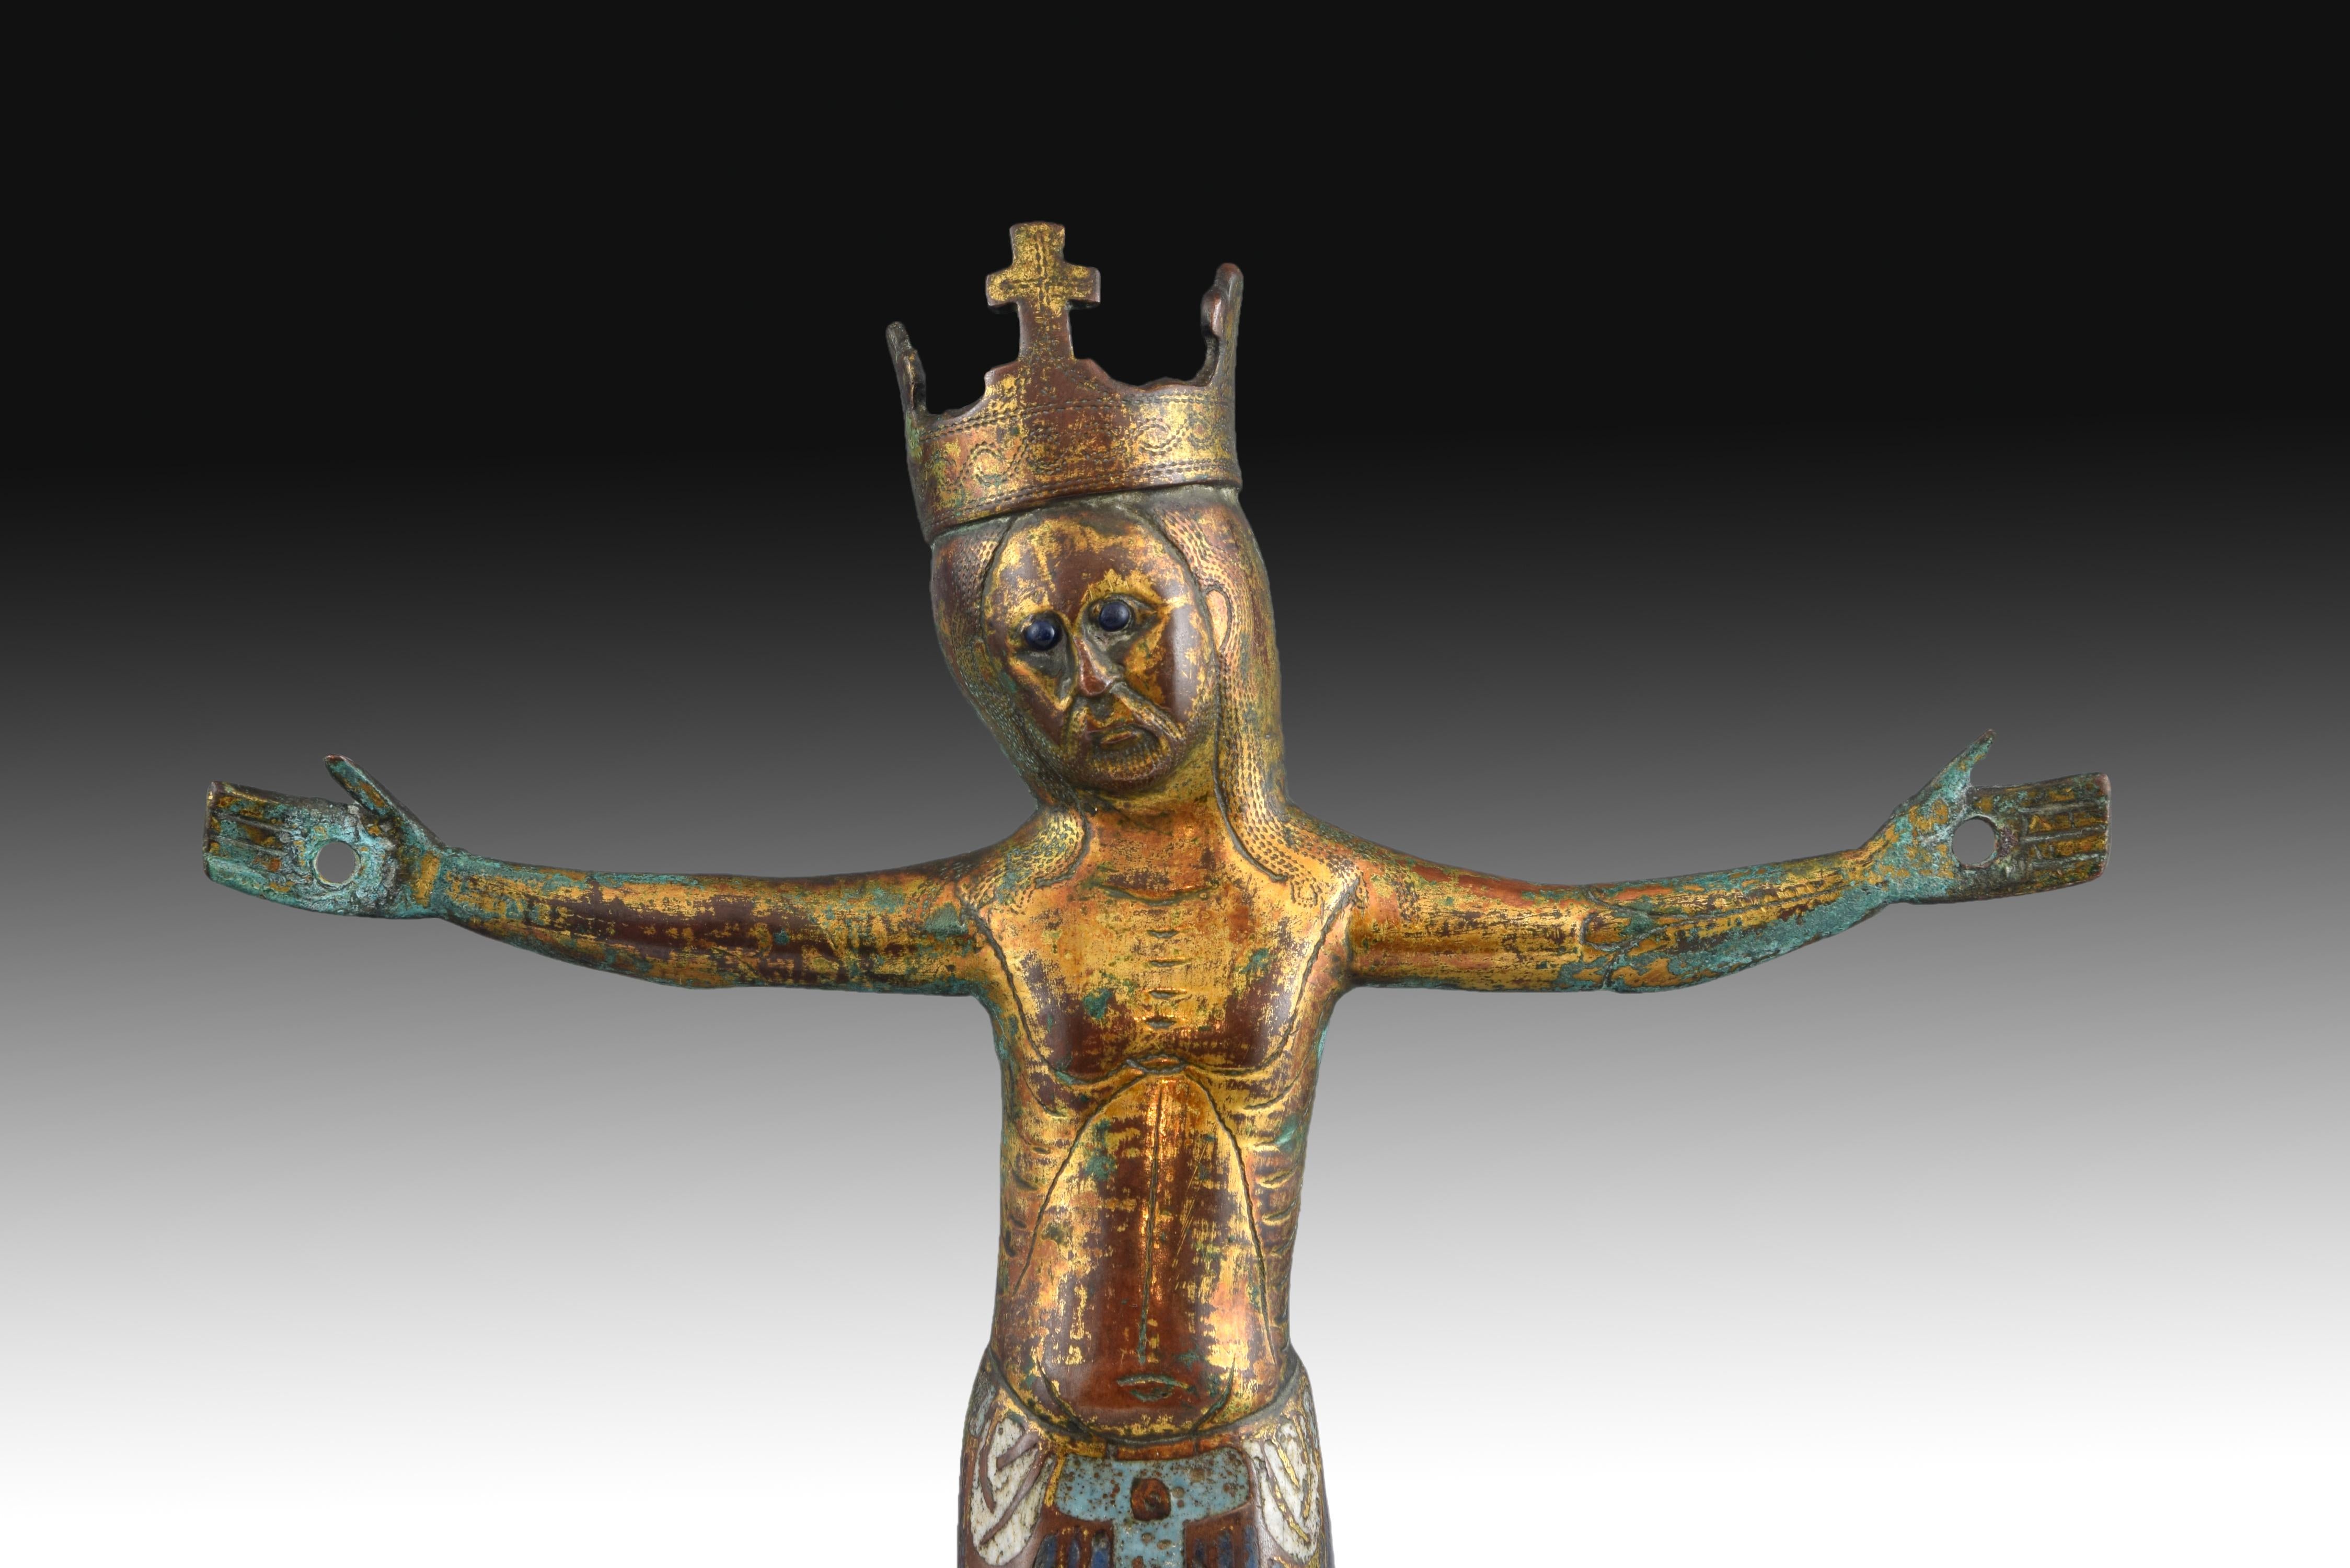 Gilt copper, enamel, jet (Stone).
Metal figure of Christ crucified with four nails, decorated in blue enamels, simplified anatomy, open eyes (jet) and open crown topped by a cross, which is decorated (like the hair) with bands of small engraved dots